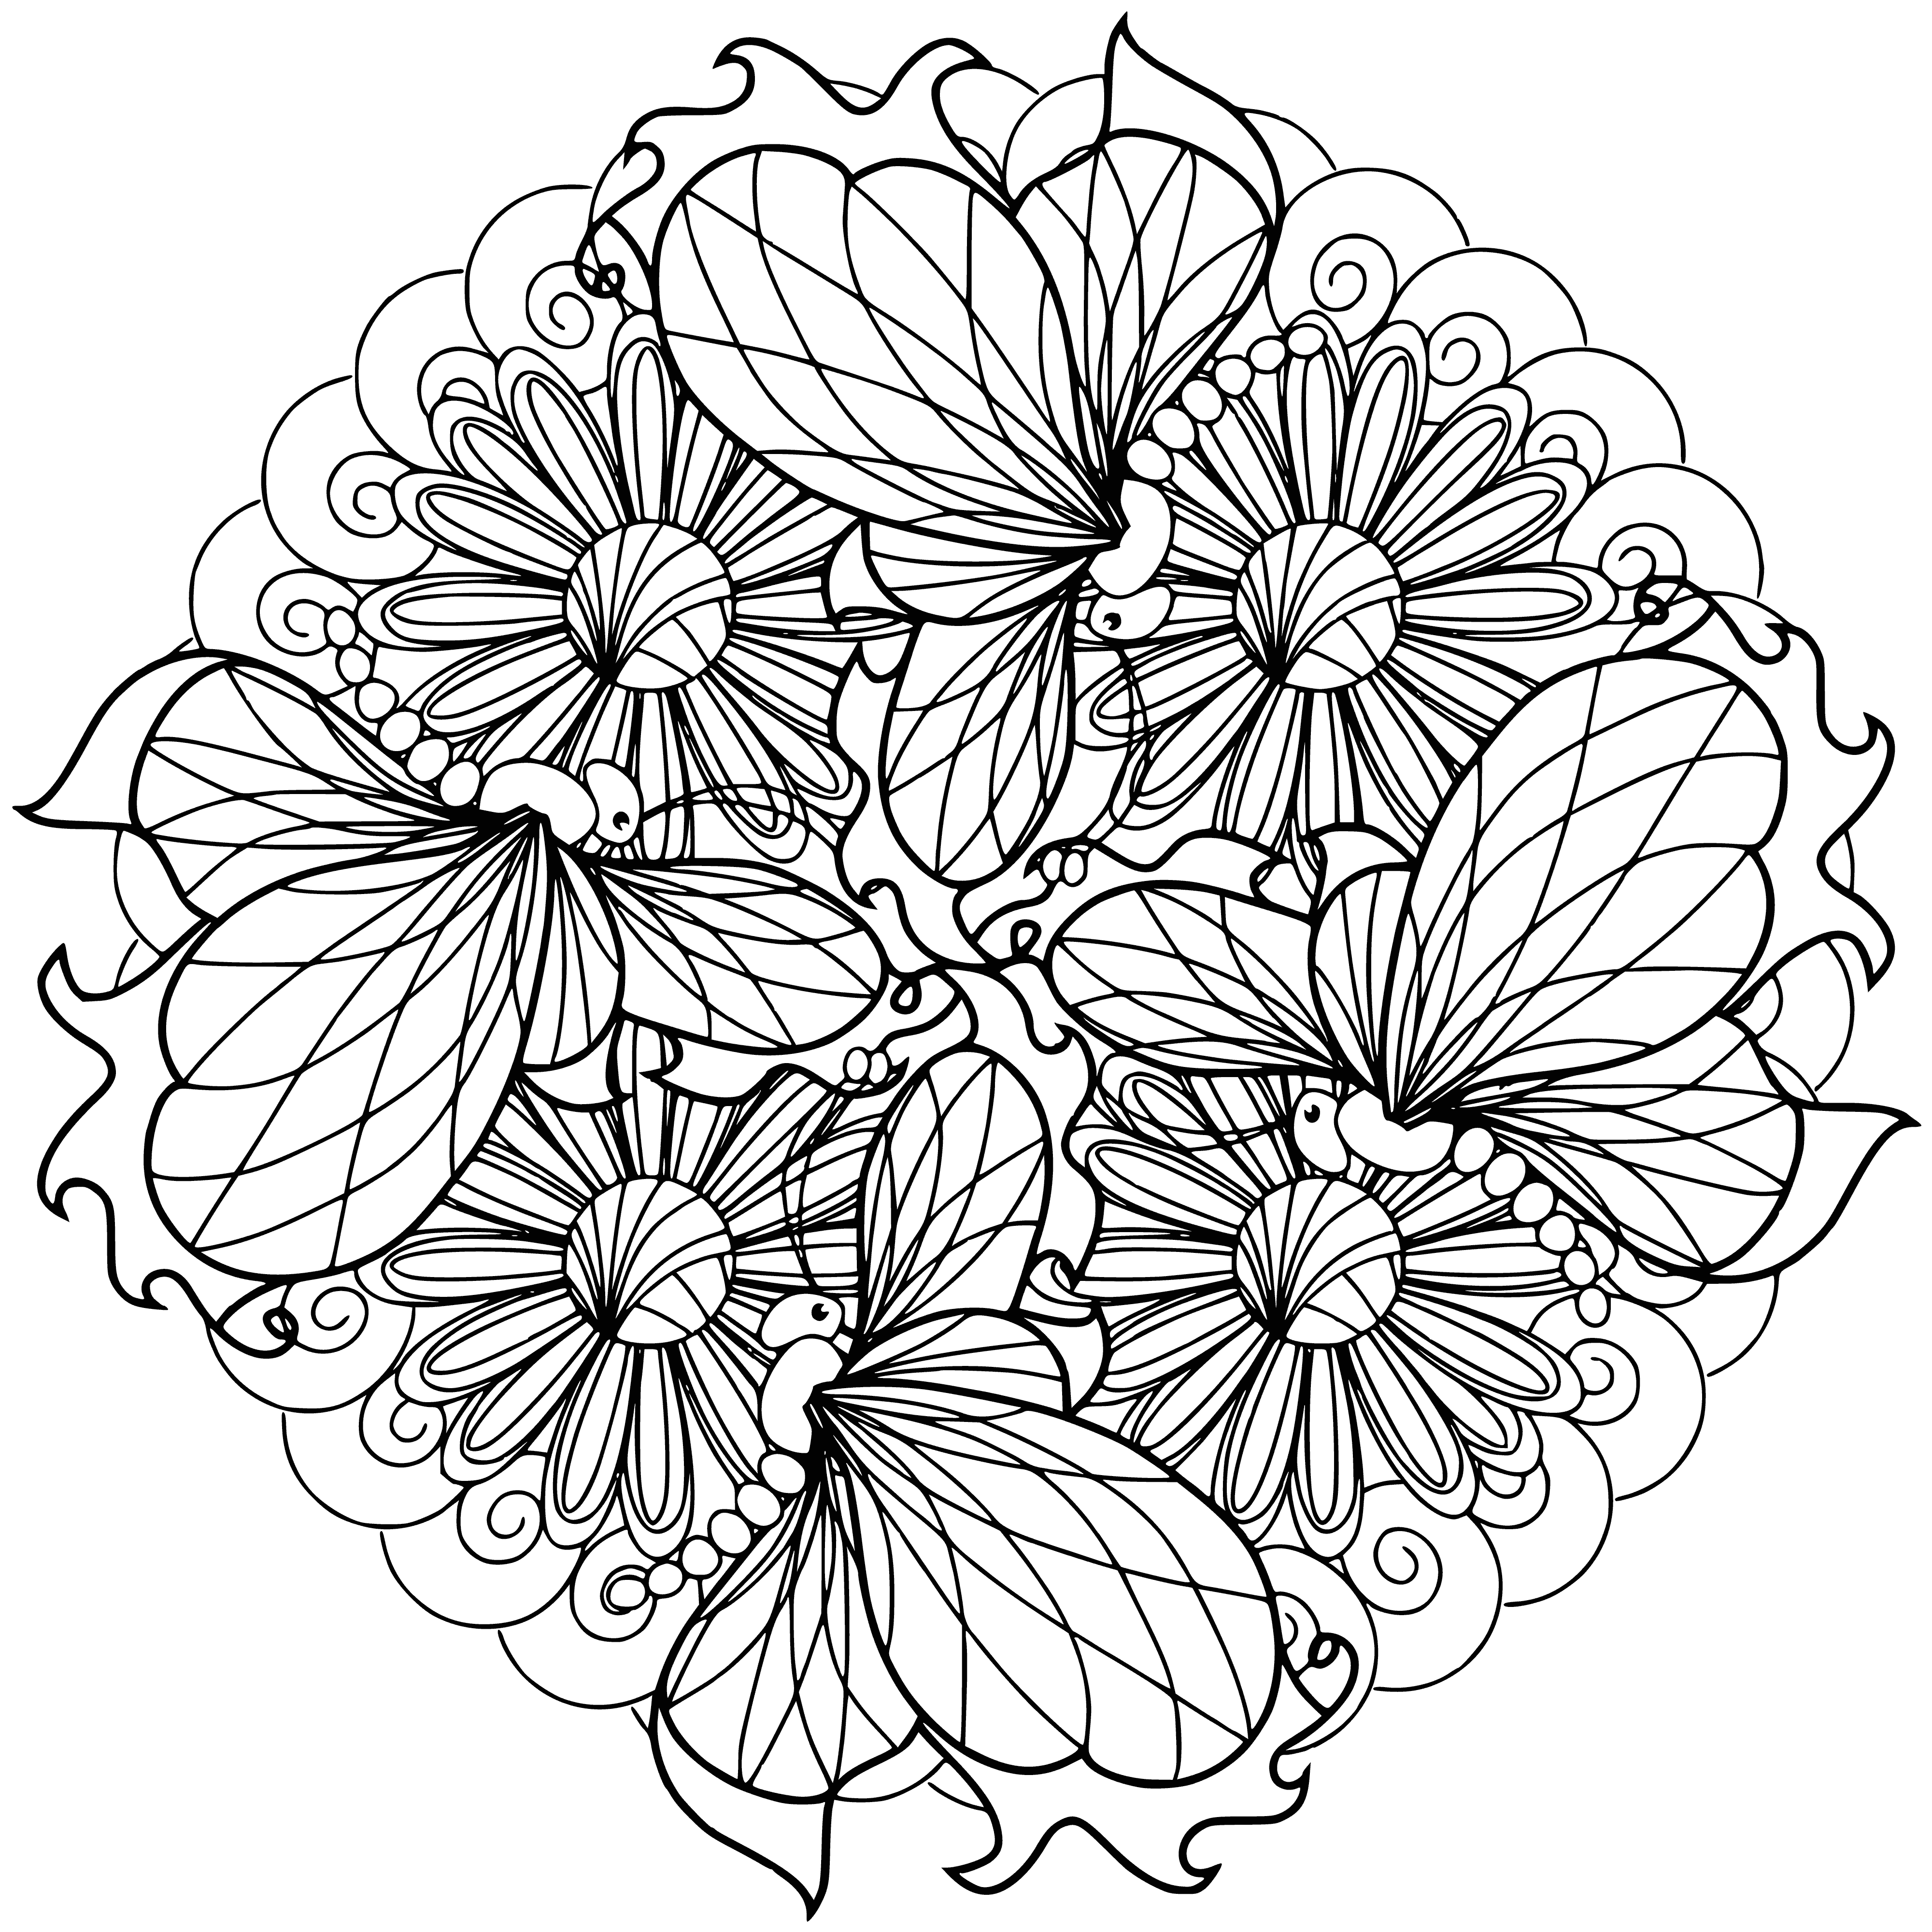 coloring page: #AdultColoring
140 characters: An array of blooming and budding flowers in varied colors and surrounded by green leaves is featured in this Adult Coloring page. #AdultColoring